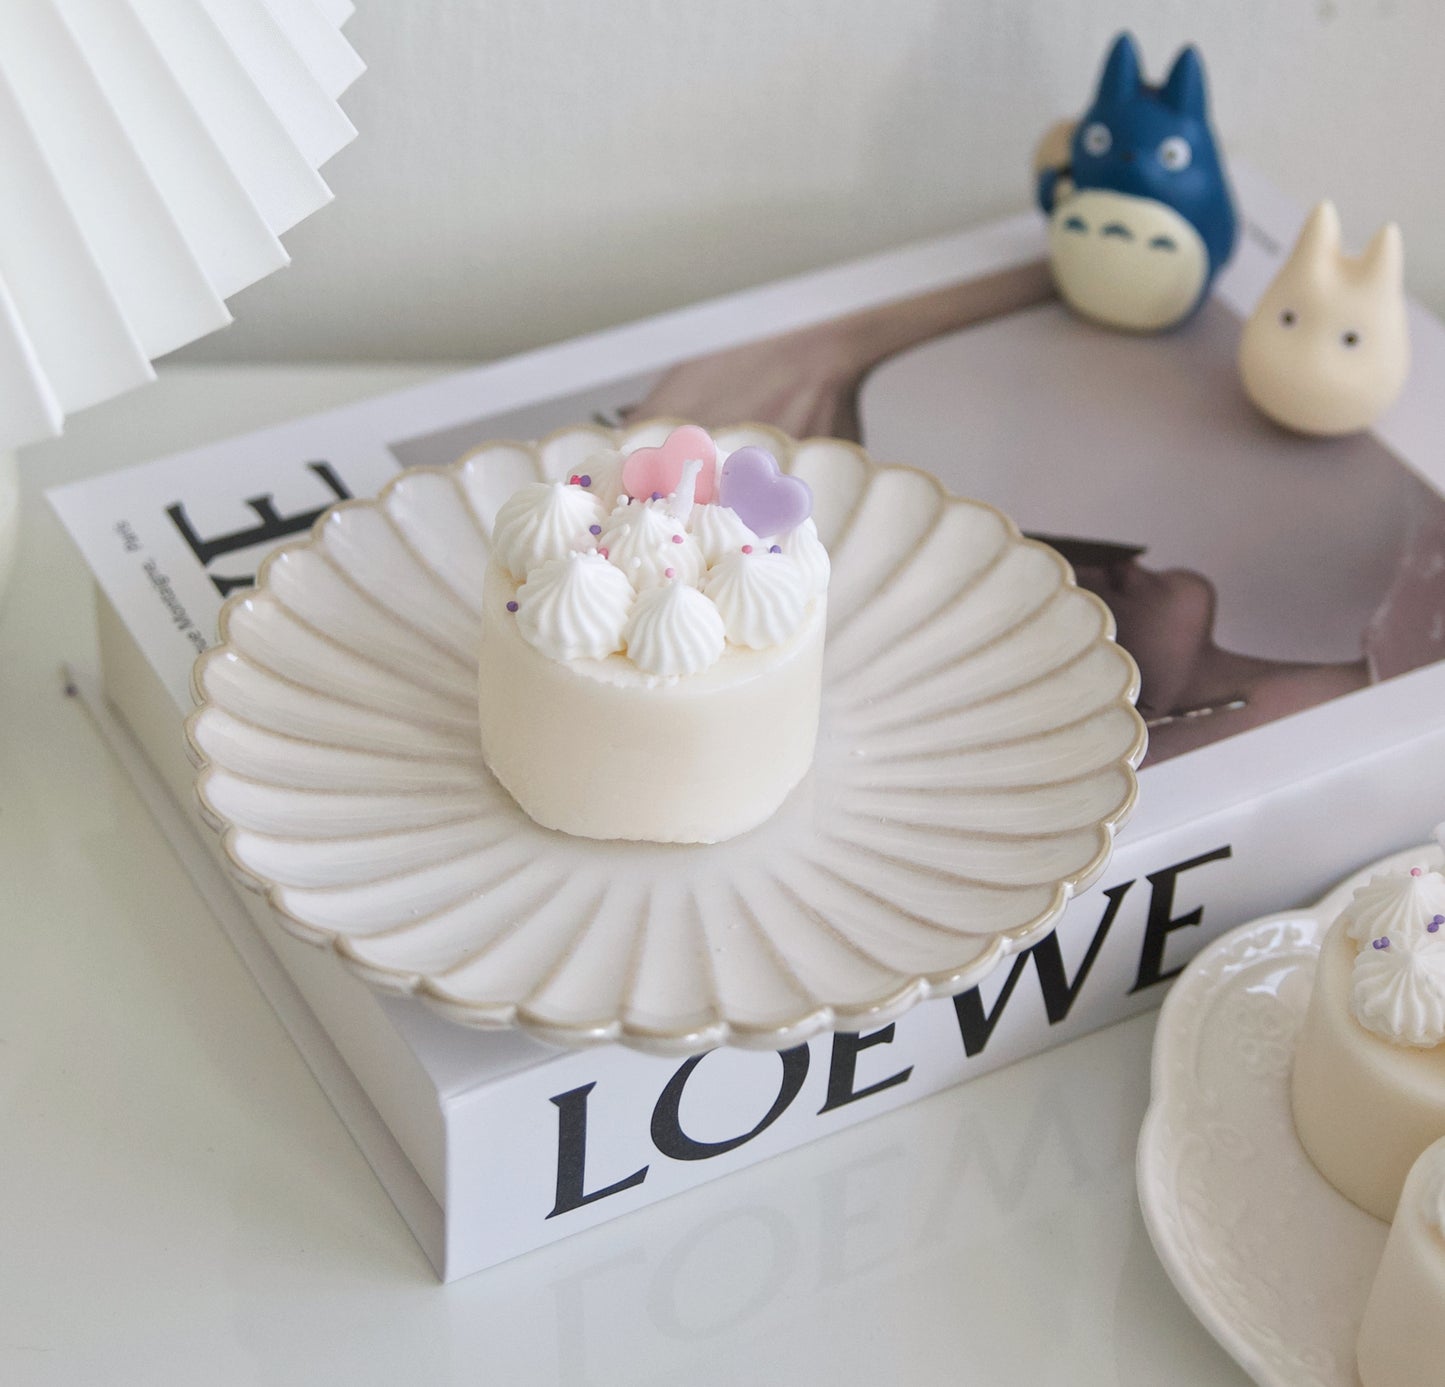 Cute Birthday Cake Candle - Made in Finland - Soywax candle